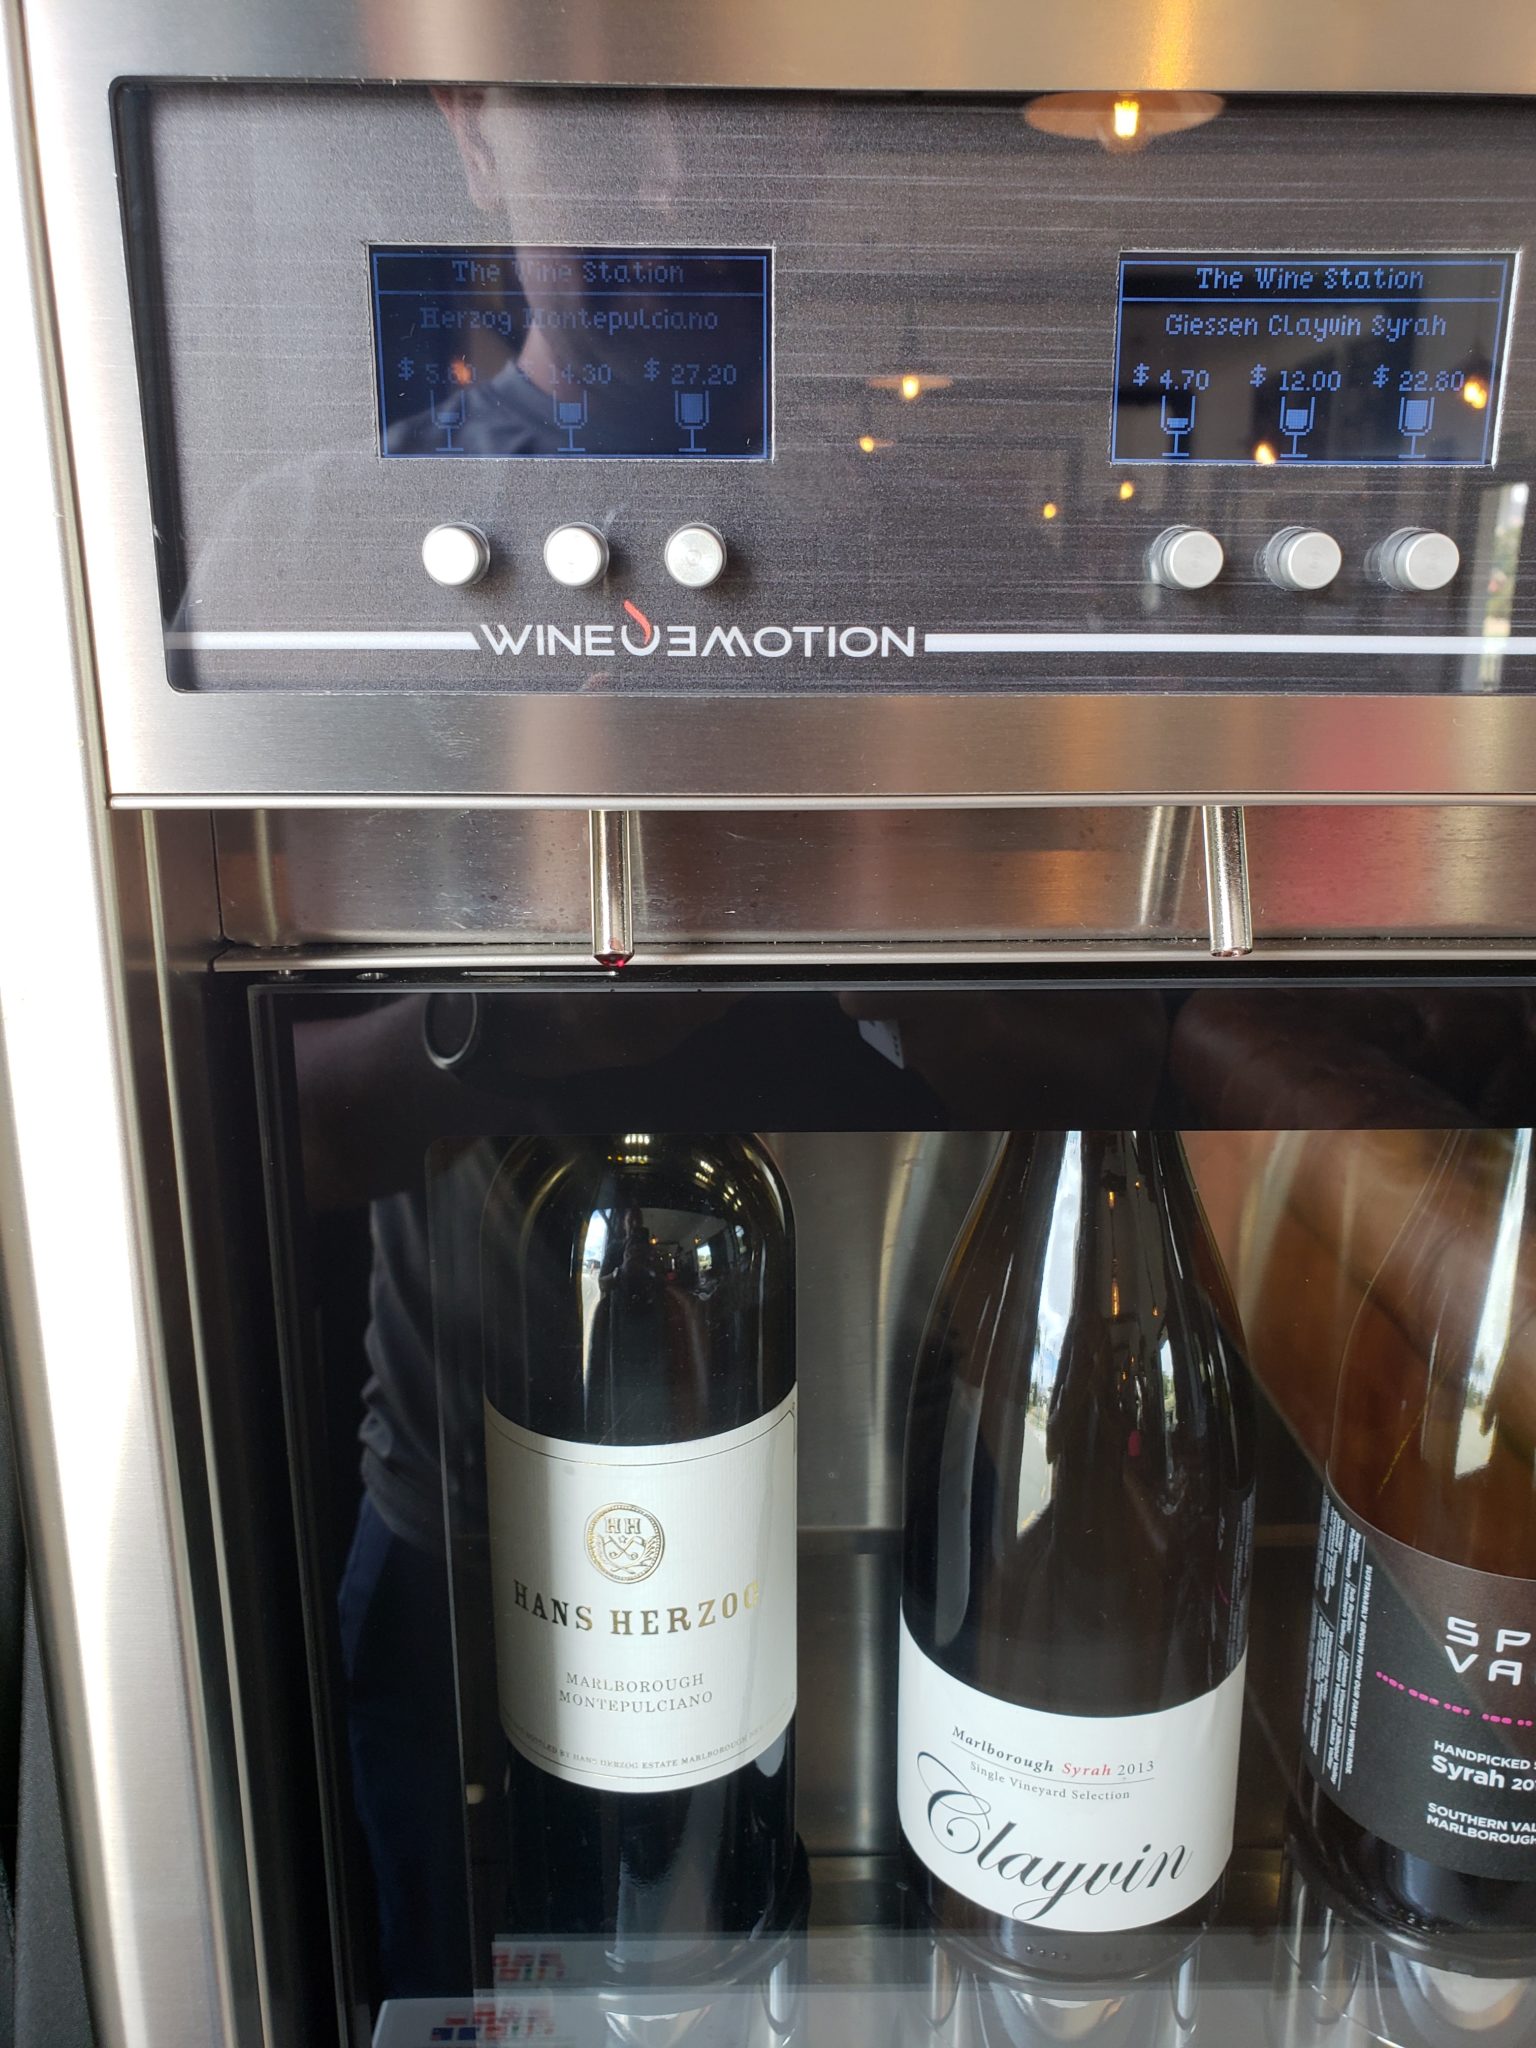 a wine cooler with a display and bottles of wine